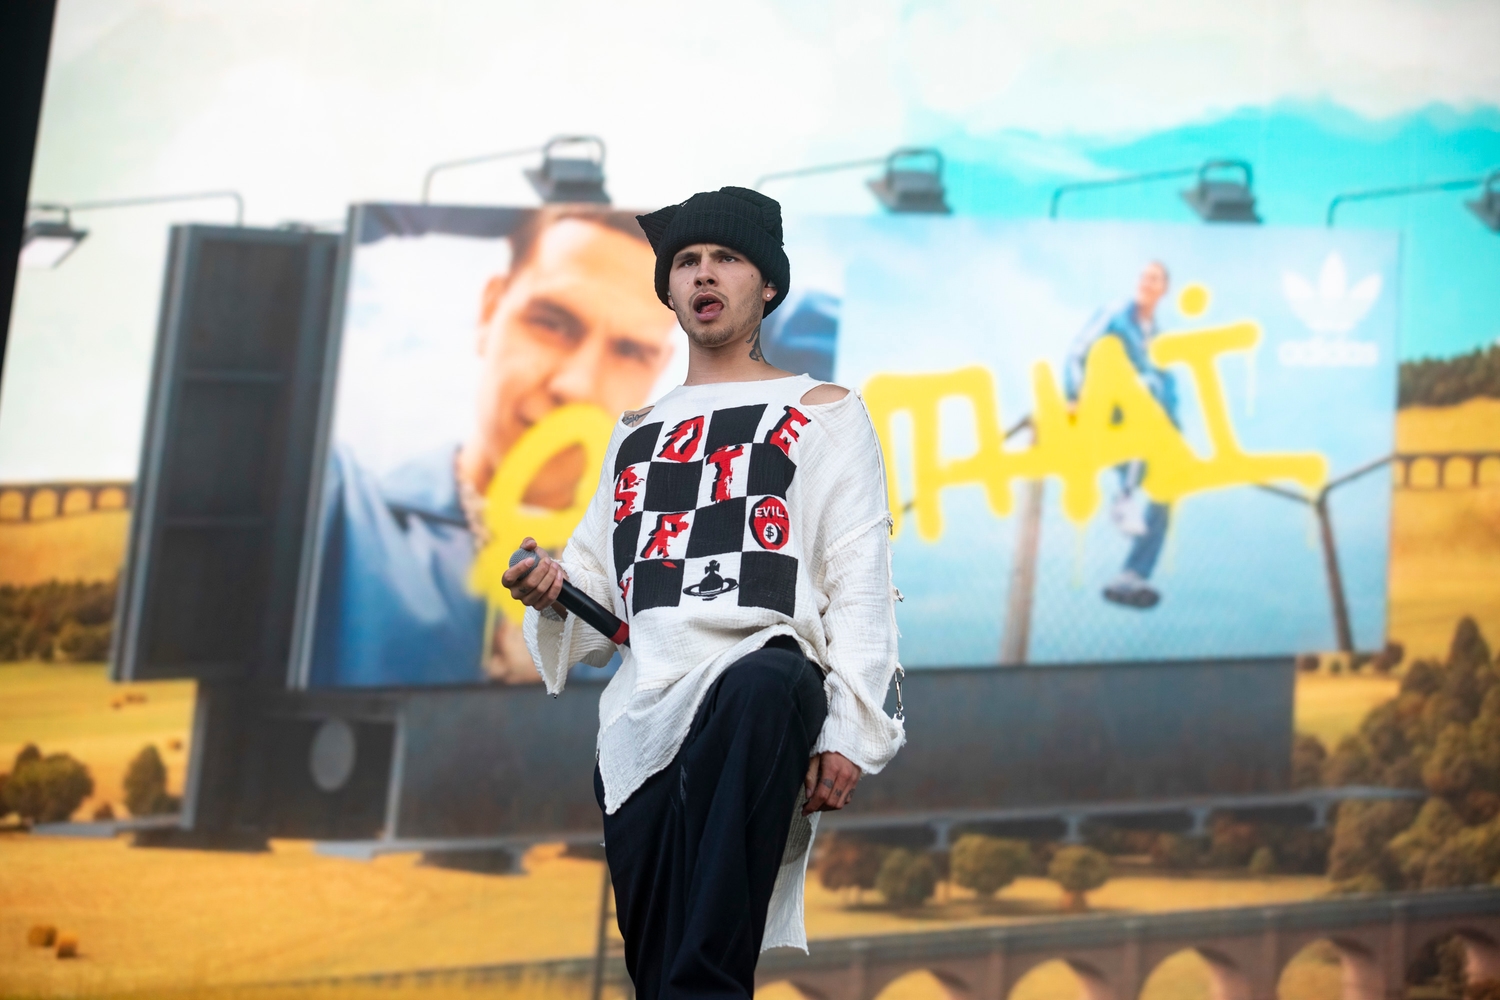 slowthai rules Saturday at Reading, while KennyHoopla marks himself out as a future superstar